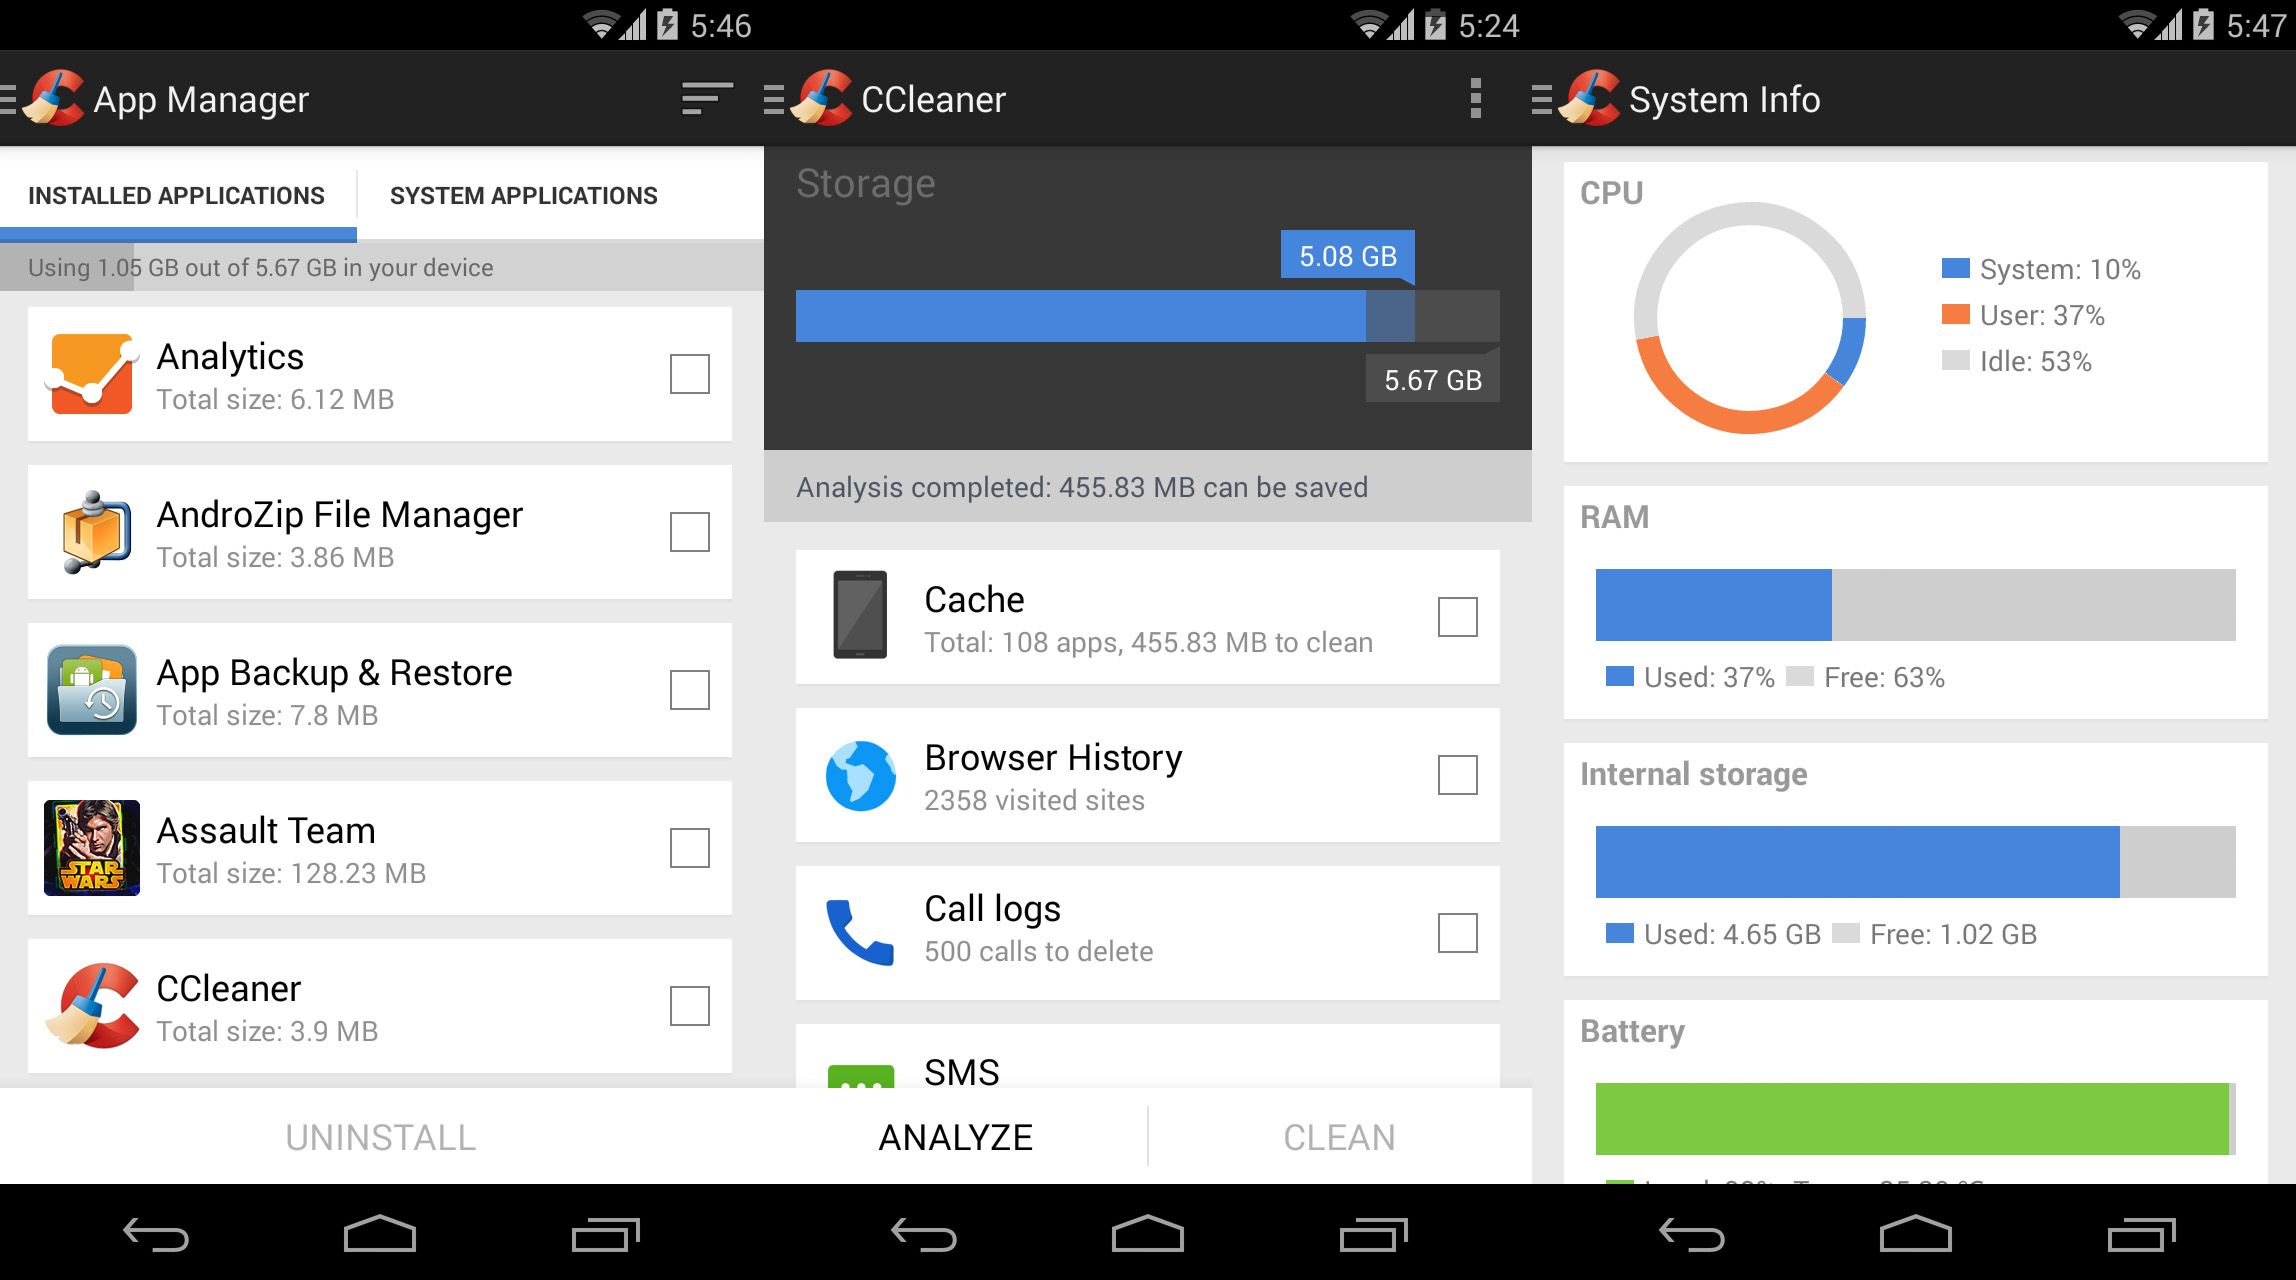 Download ccleaner windows 10 free - Flagship ccleaner free download mac os Ultra Google Play edition